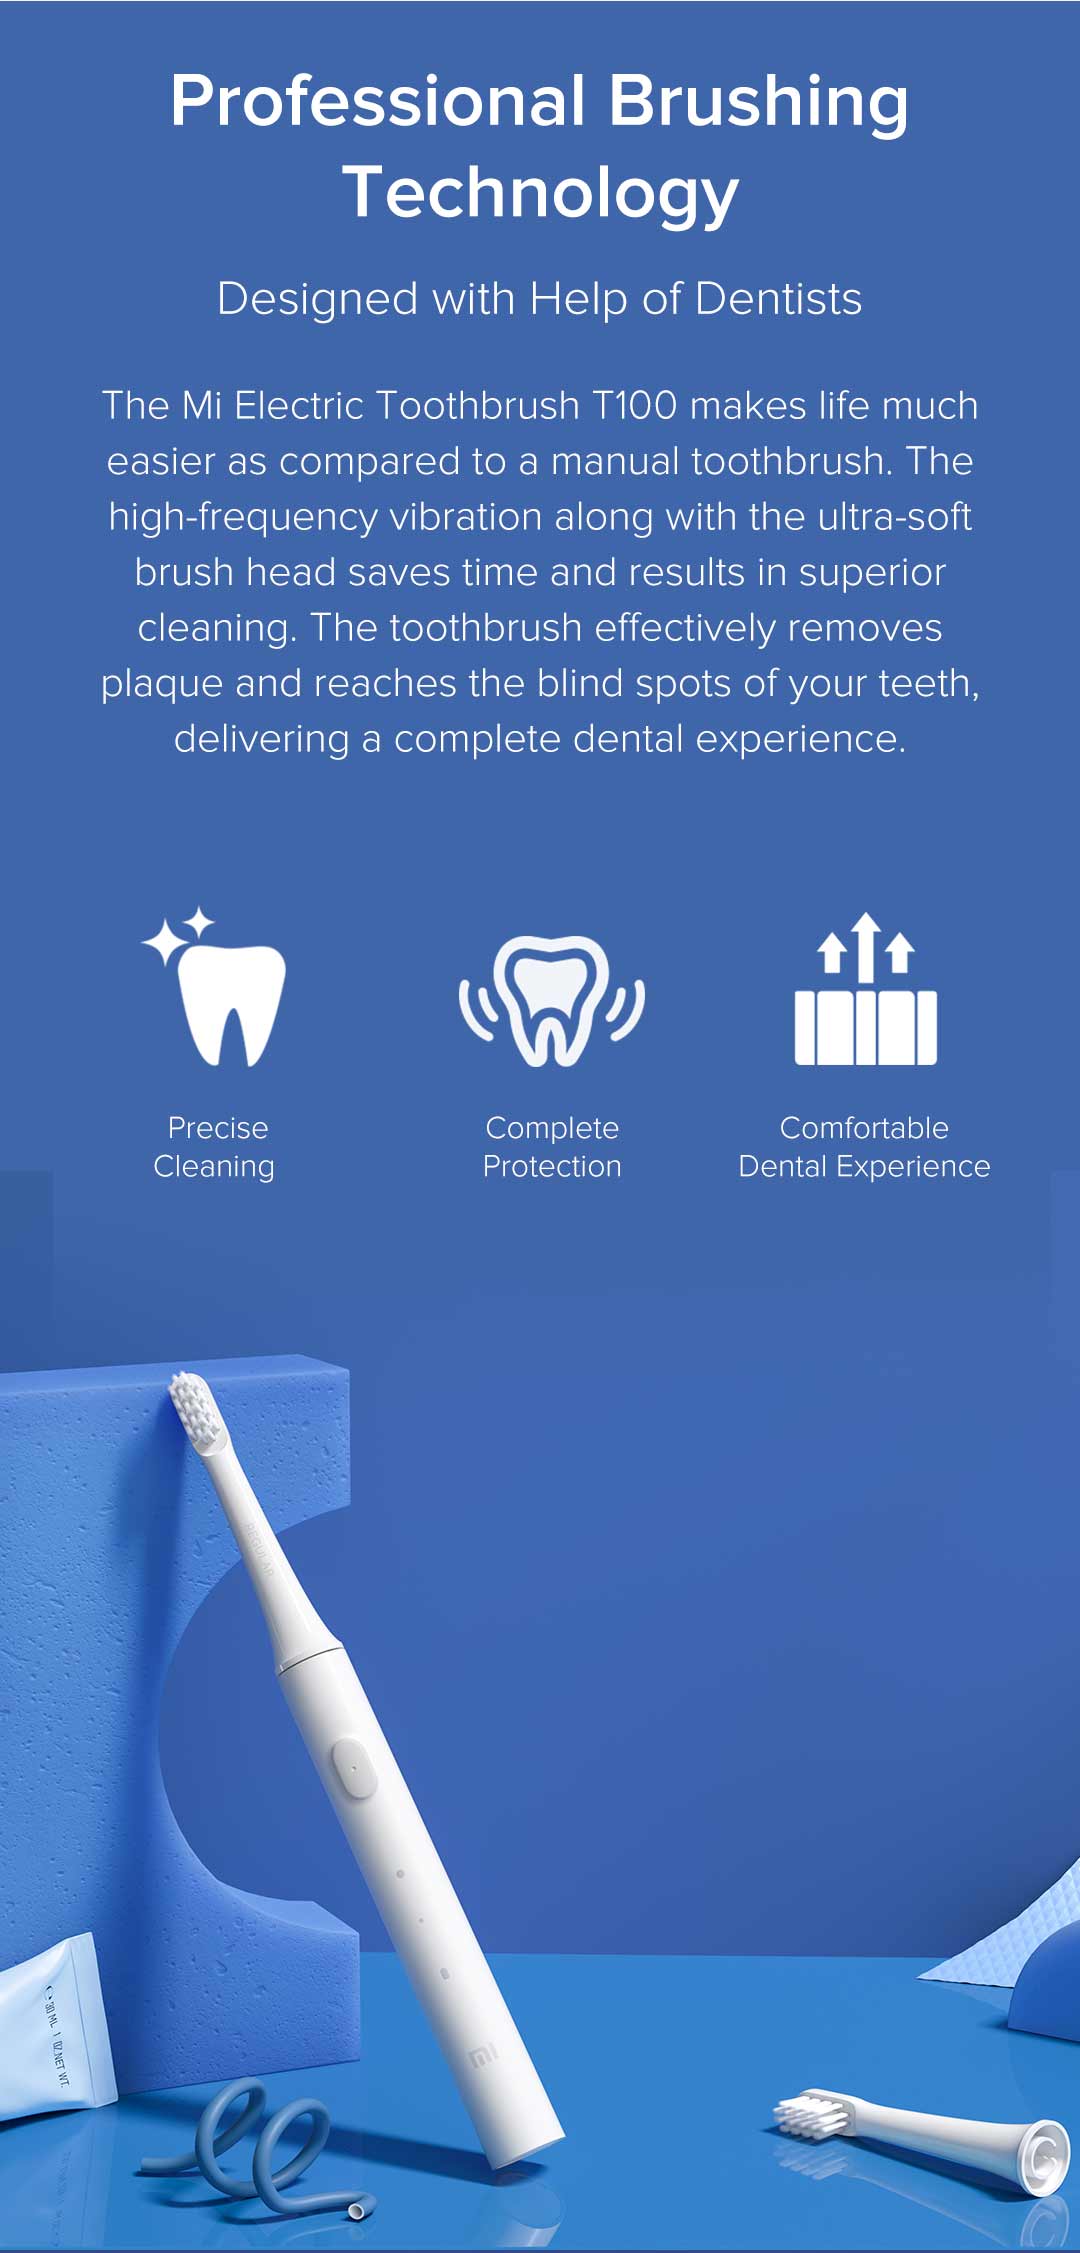 mi-electric-toothbrush-T100-proffessional-brushing-technology